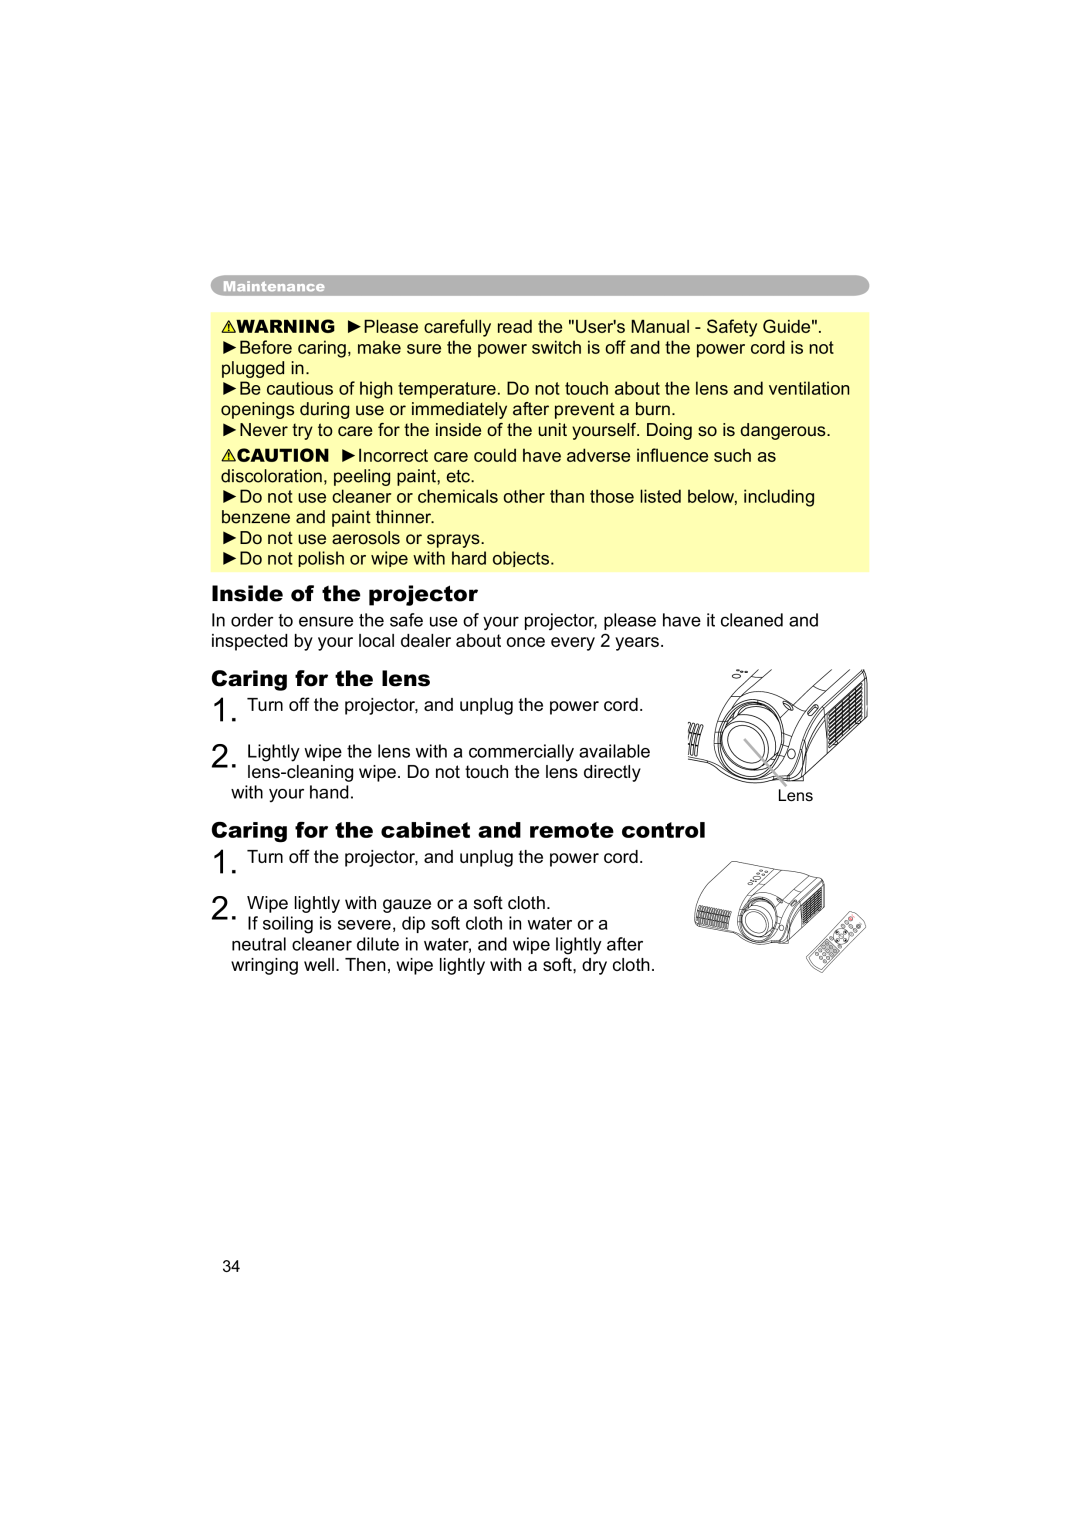 Hitachi PJ-TX100 user manual Inside of the projector, Caring for the lens, Caring for the cabinet and remote control, Lens 